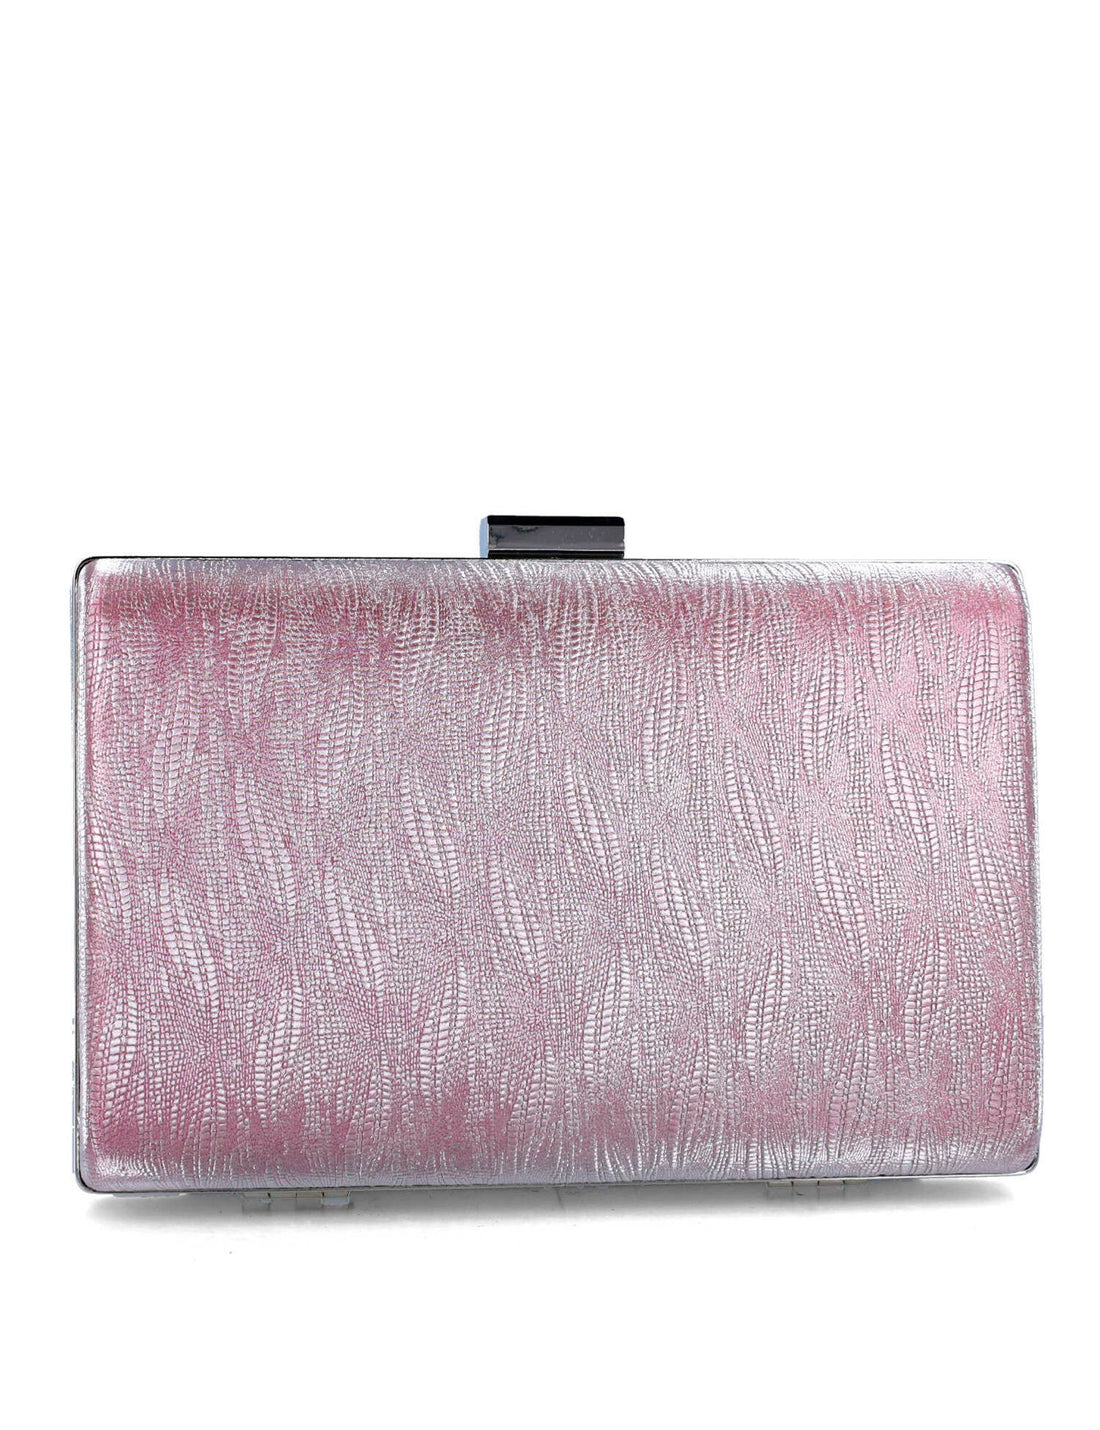 Pink Clutch With Design_85496_84_01